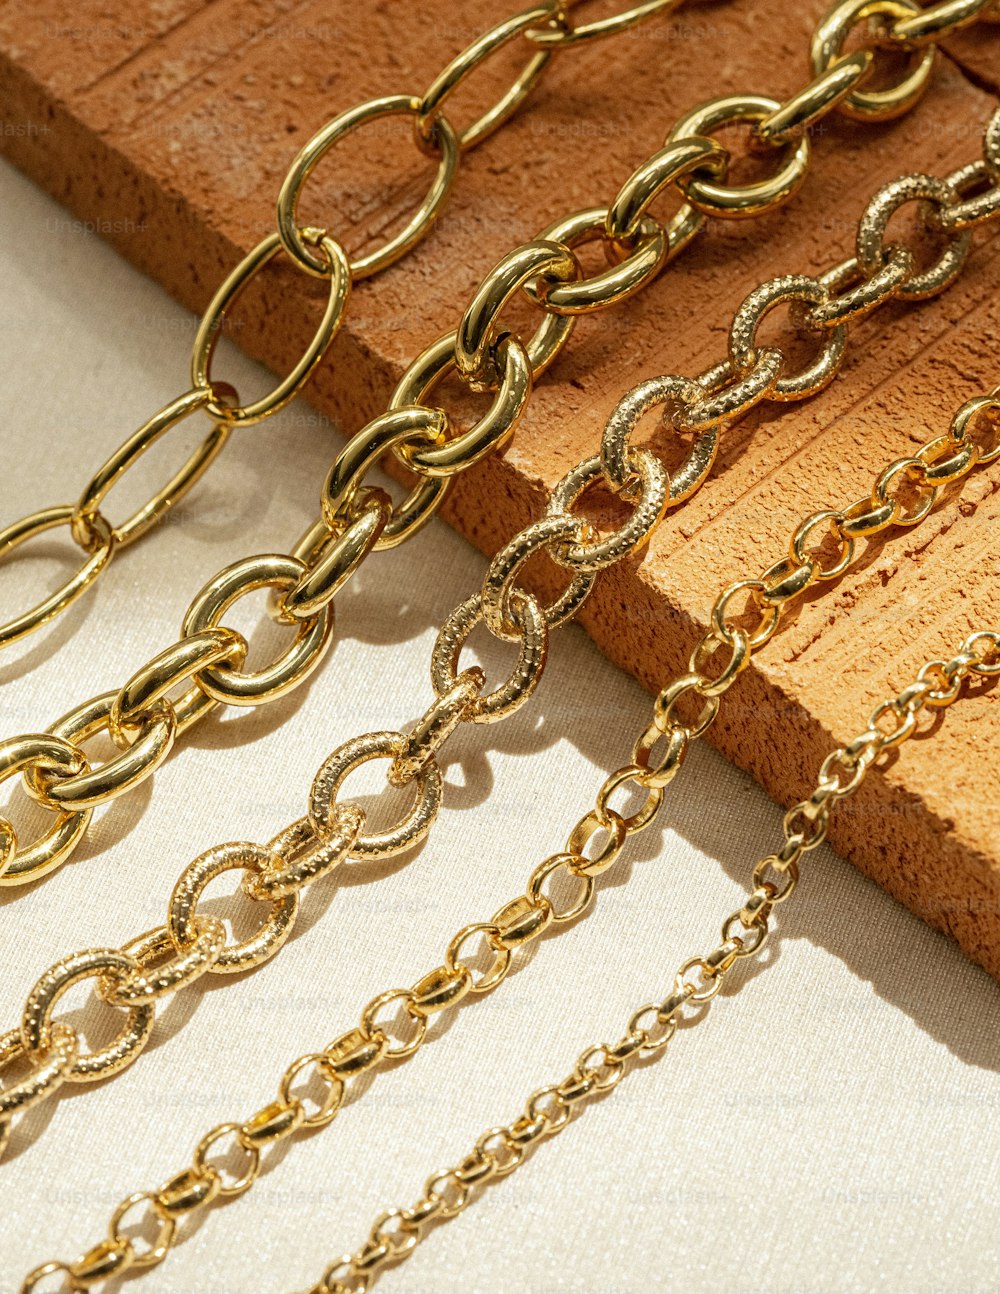 a close up of a number of chains on a table